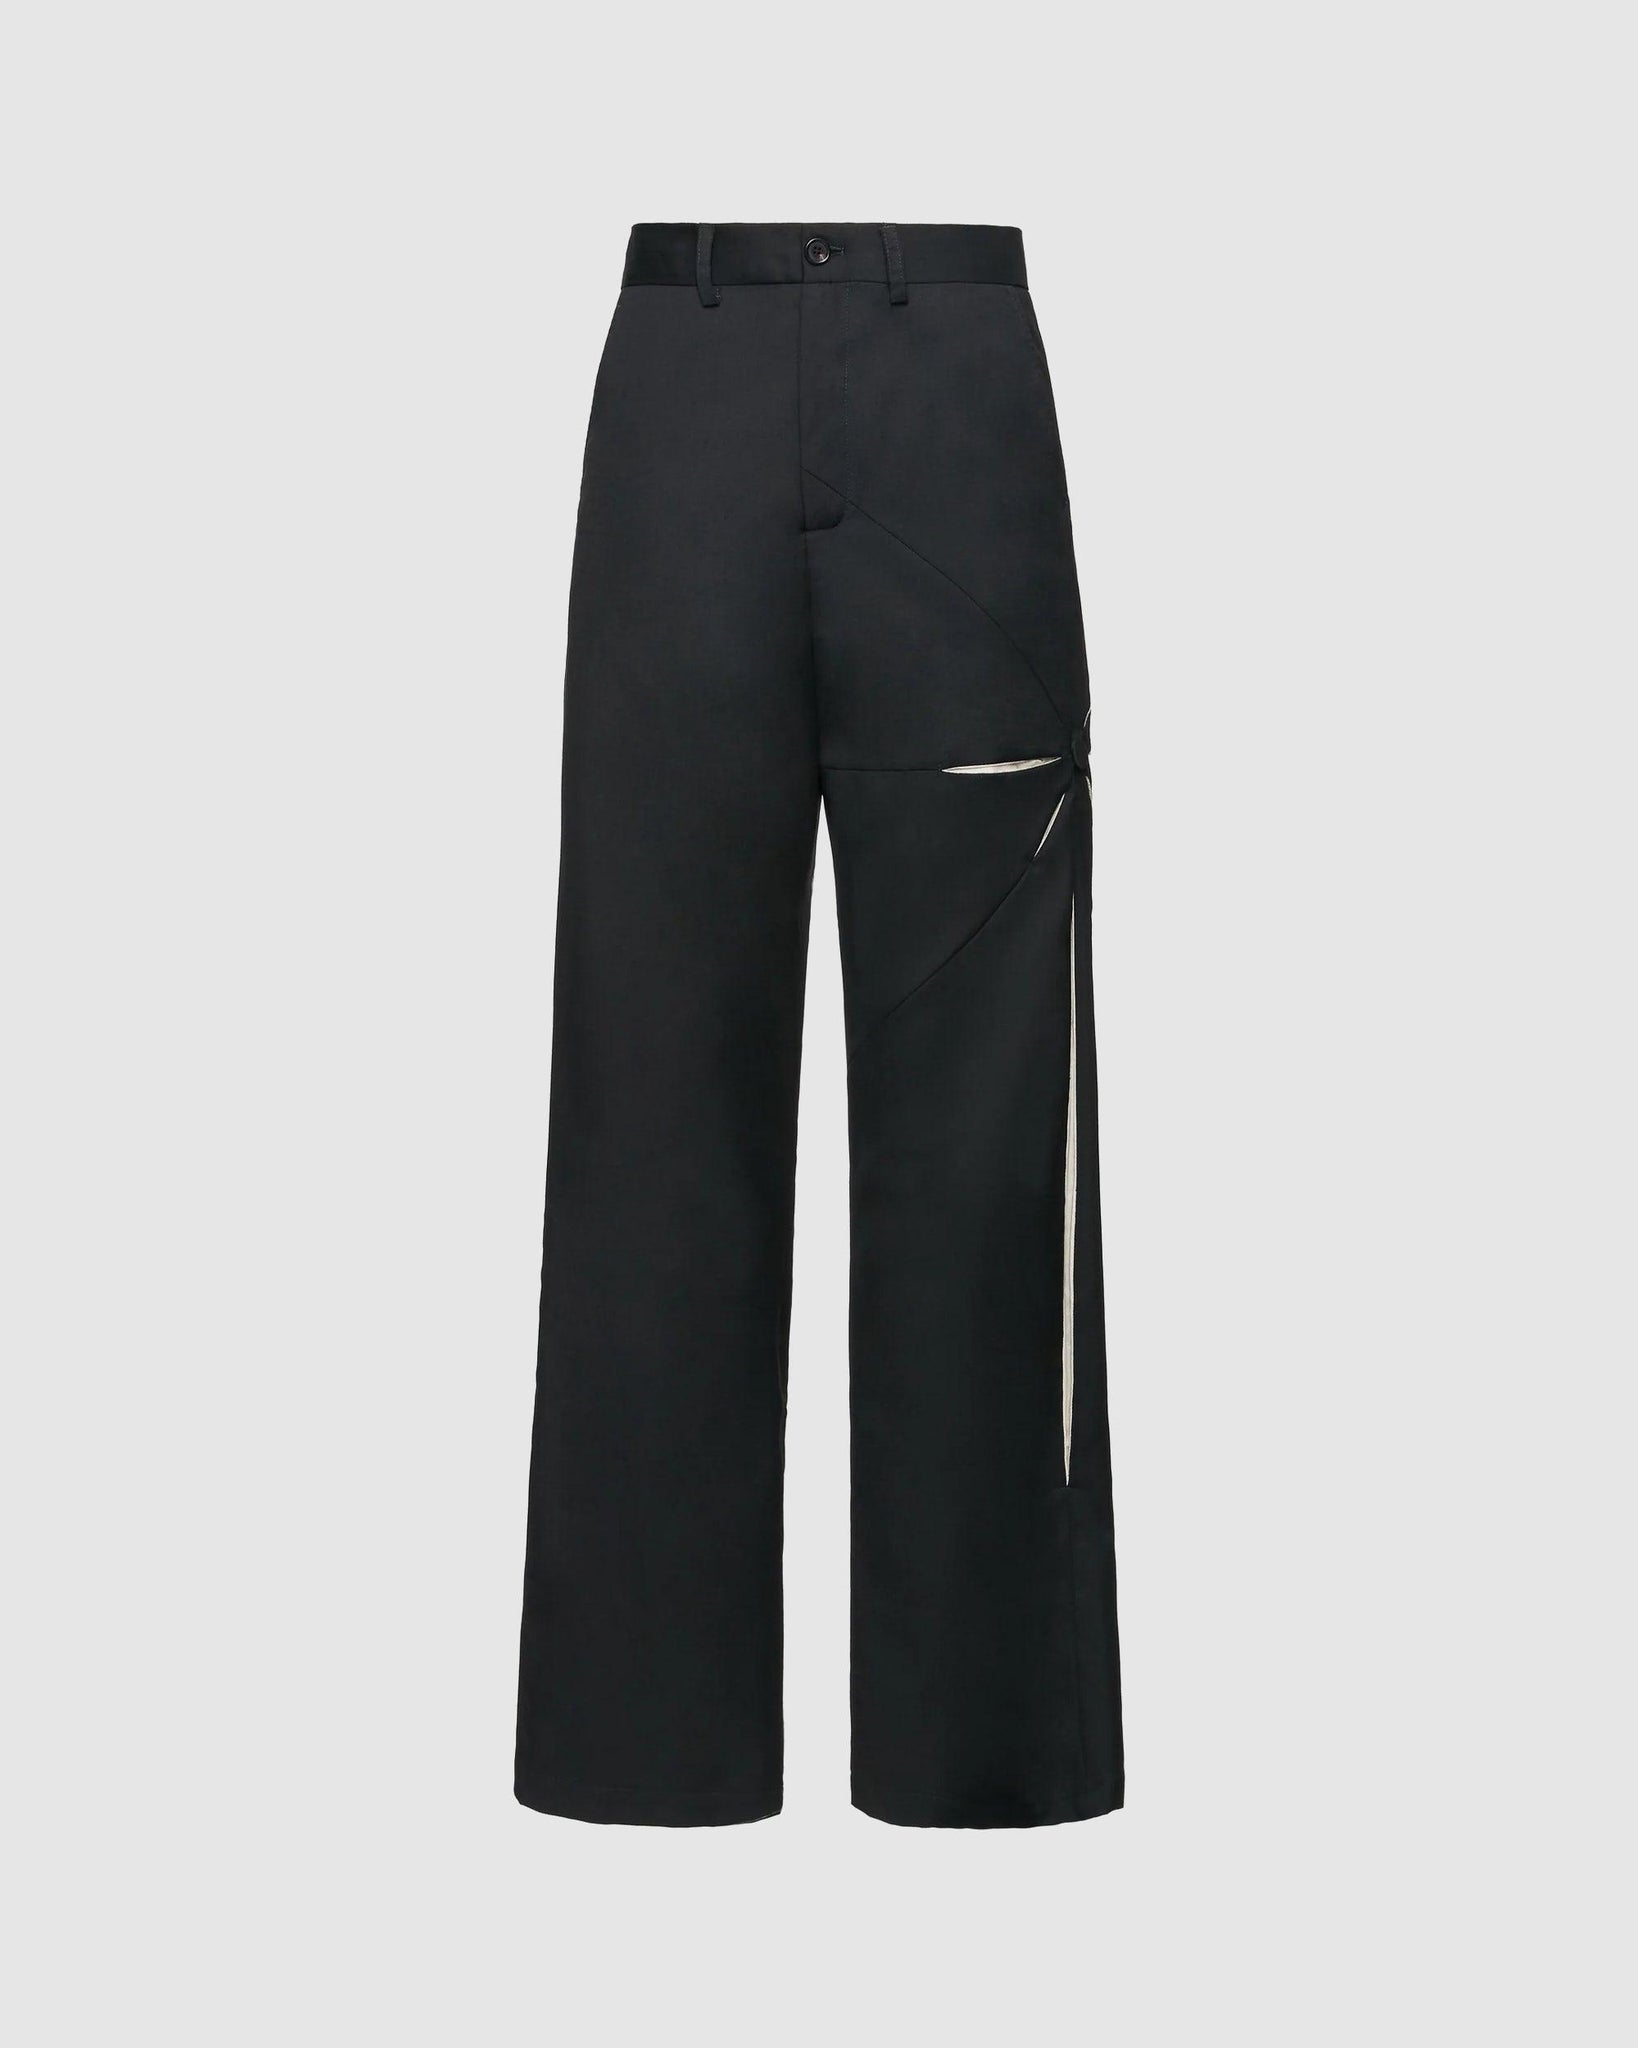 Origami Pants - {{ collection.title }} - Chinatown Country Club 